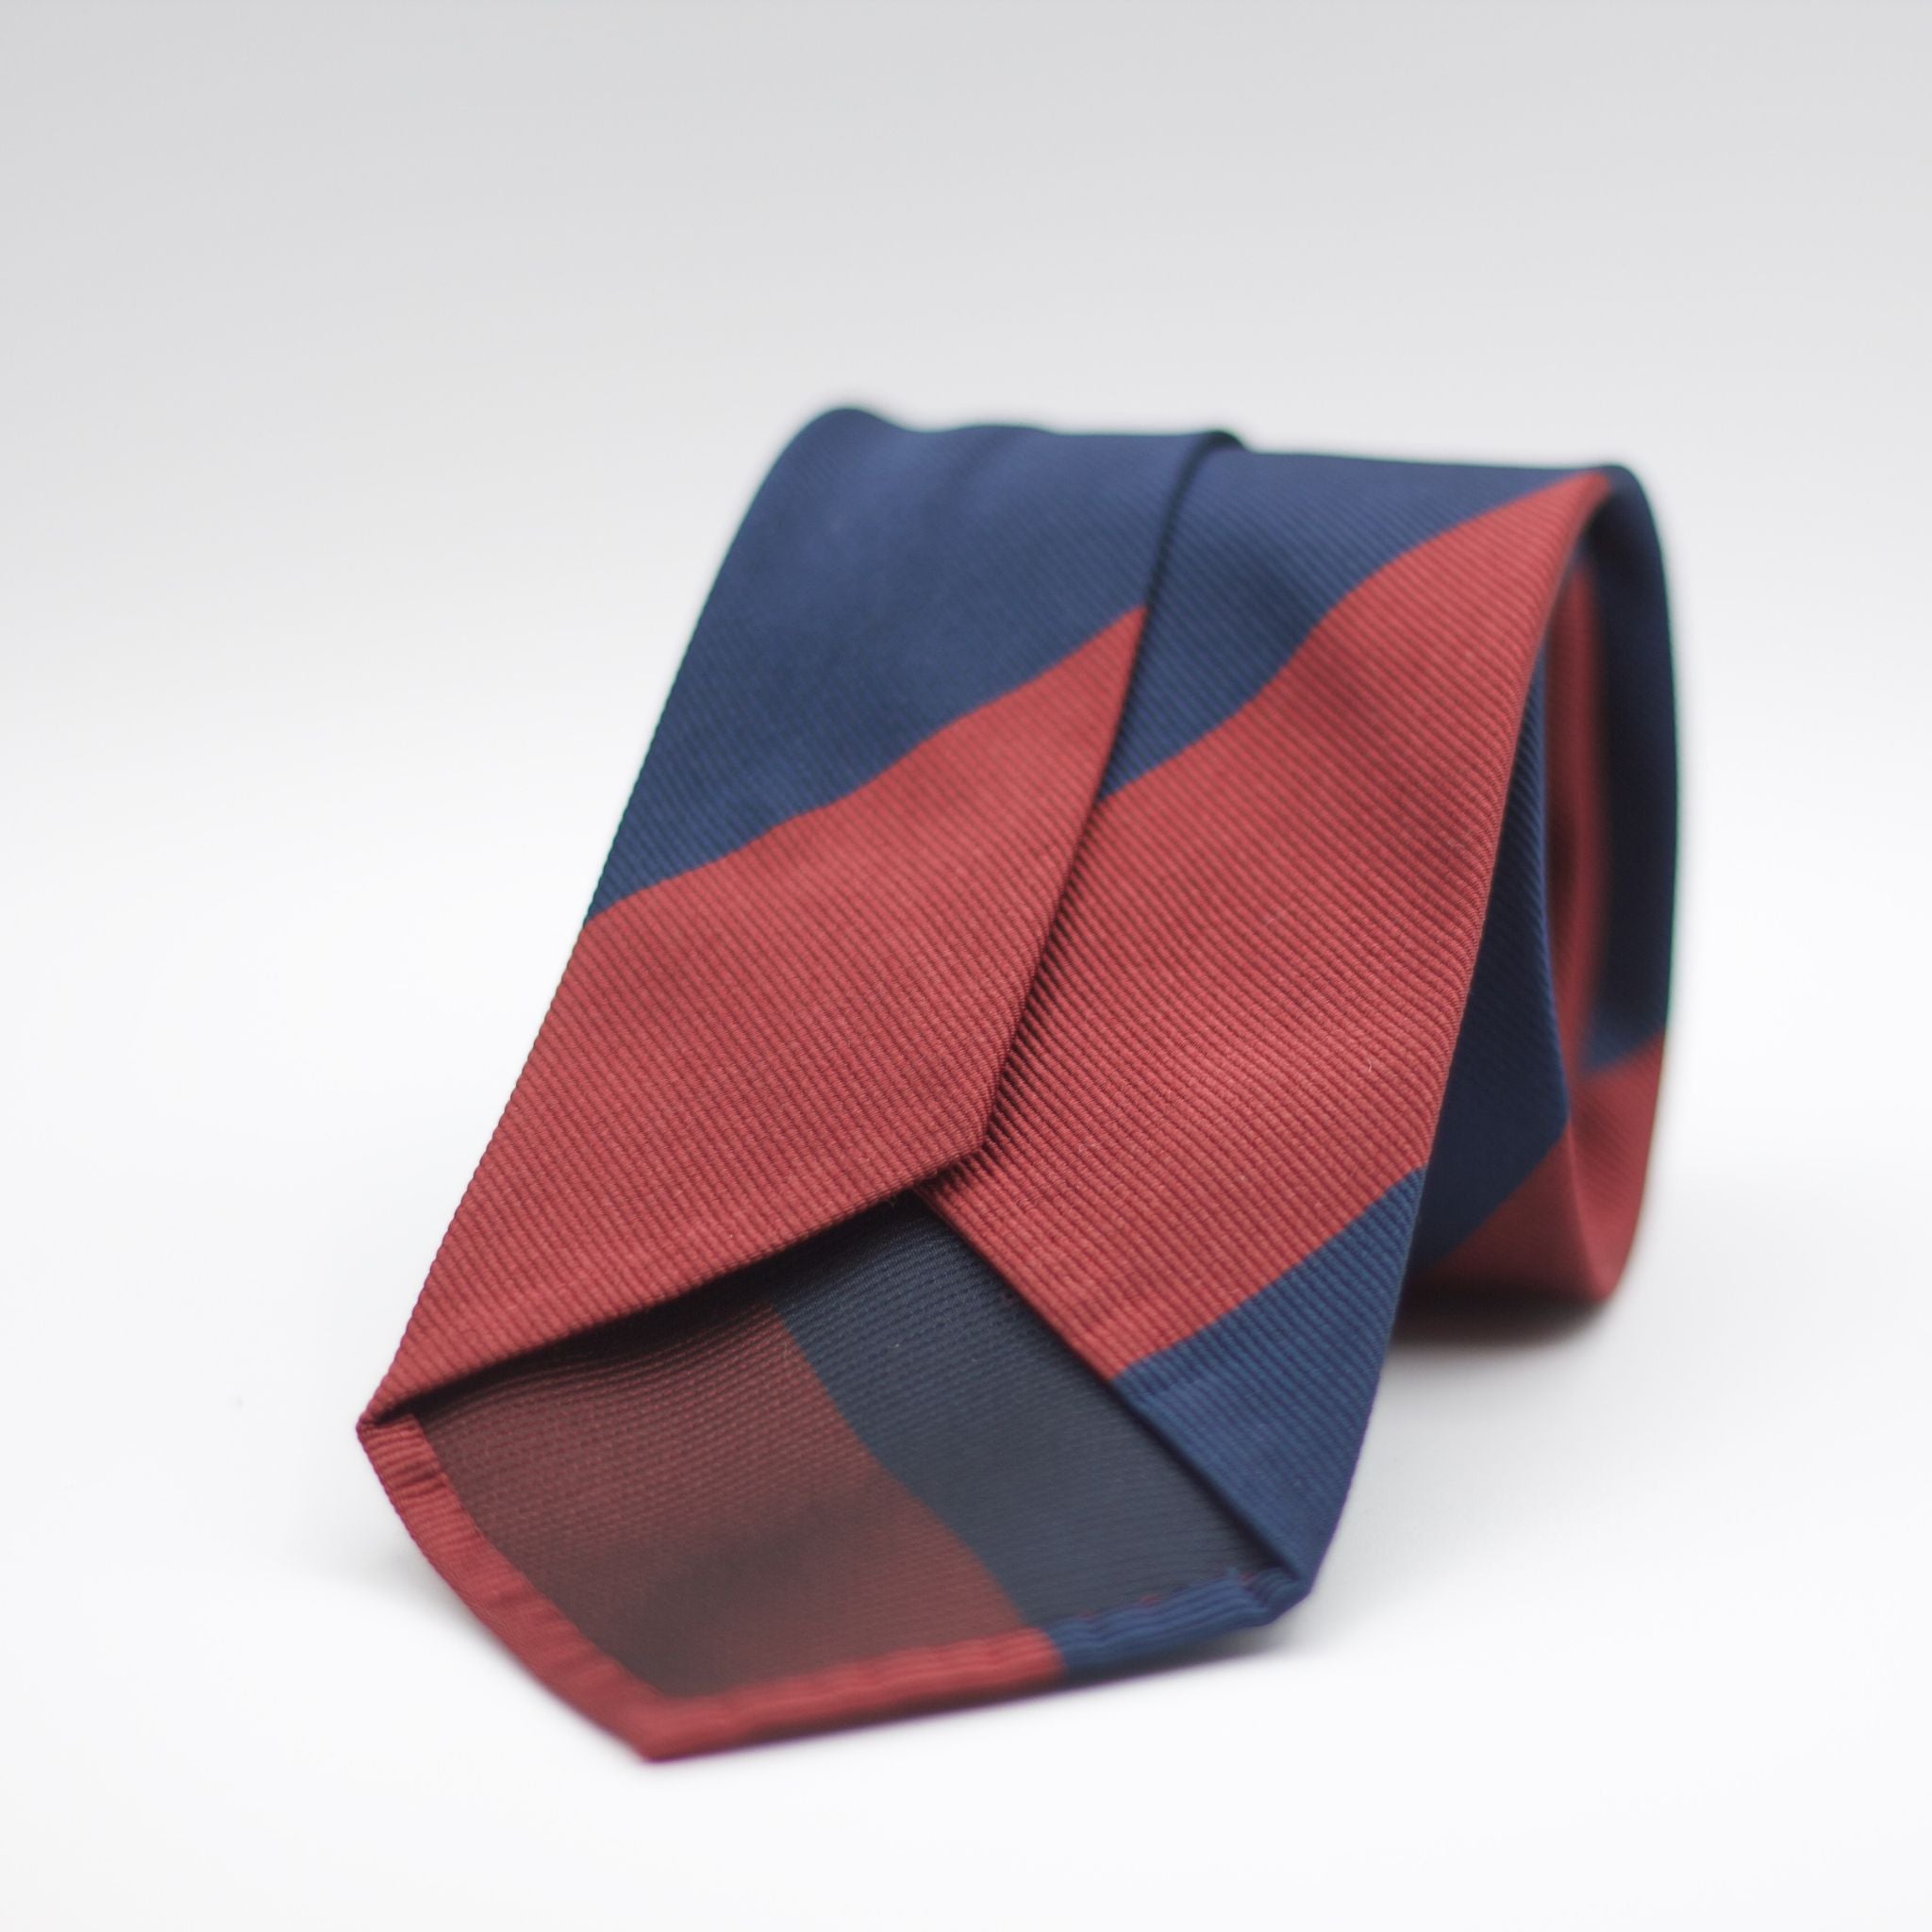 Cruciani & Bella 100% Woven Jacquard Silk Unlined Blue and Burgundy block stripes tie Handmade in Italy 8 x 150 cm